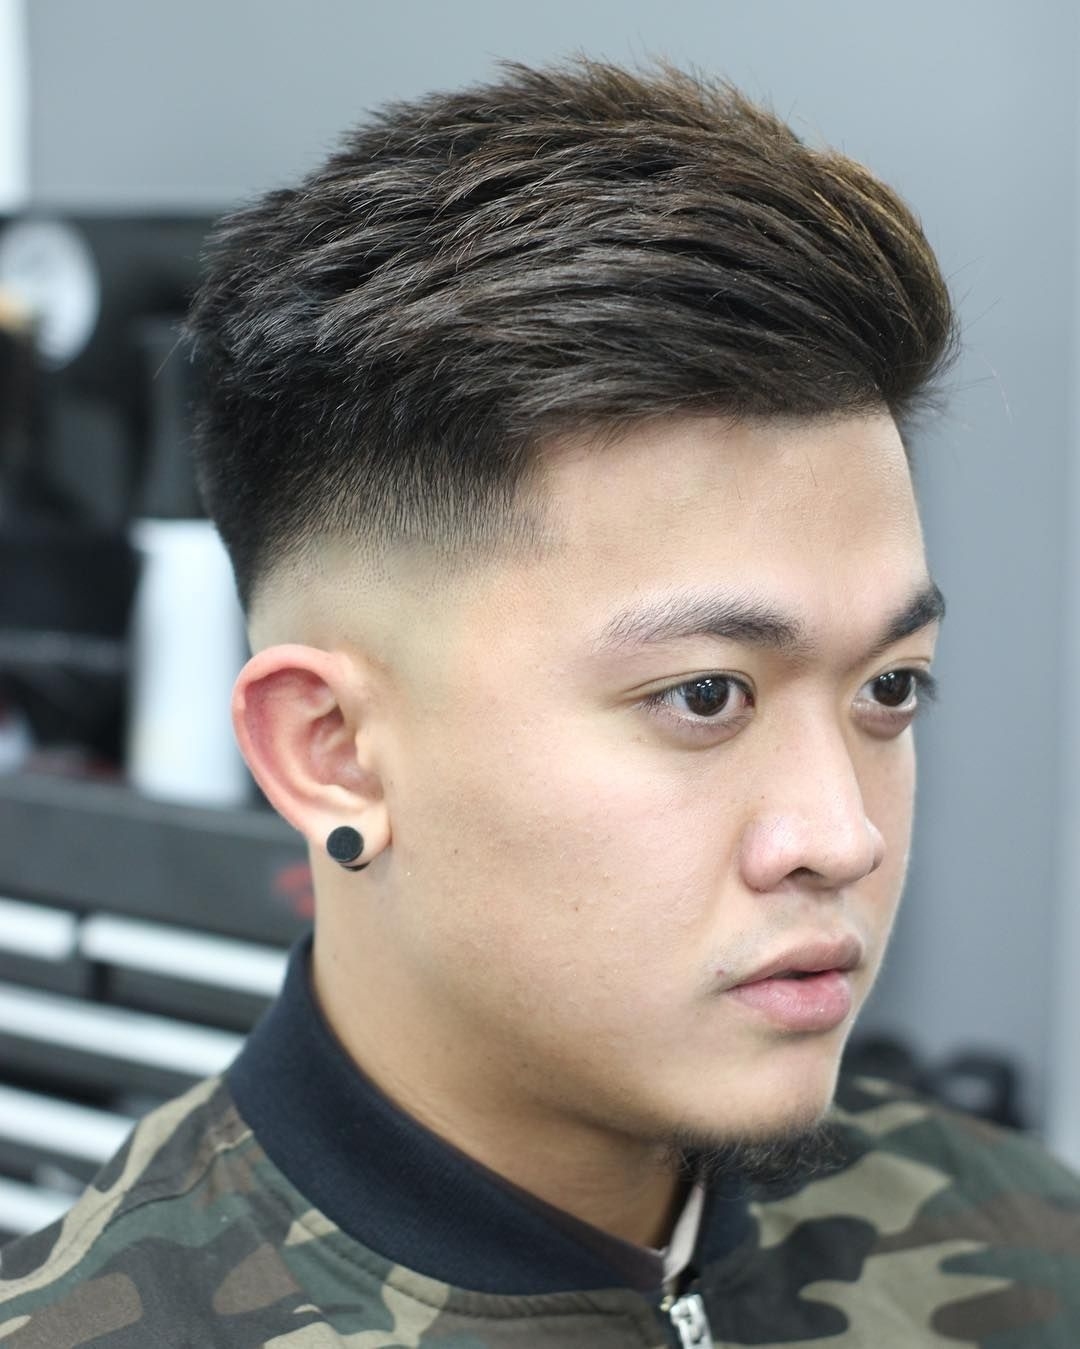 25 + Best Low Fade Haircuts &amp;amp; Hairstyles For Men&amp;#039;s | Cabello Hombre in Amazing Good Hairstyles For Asian Guys